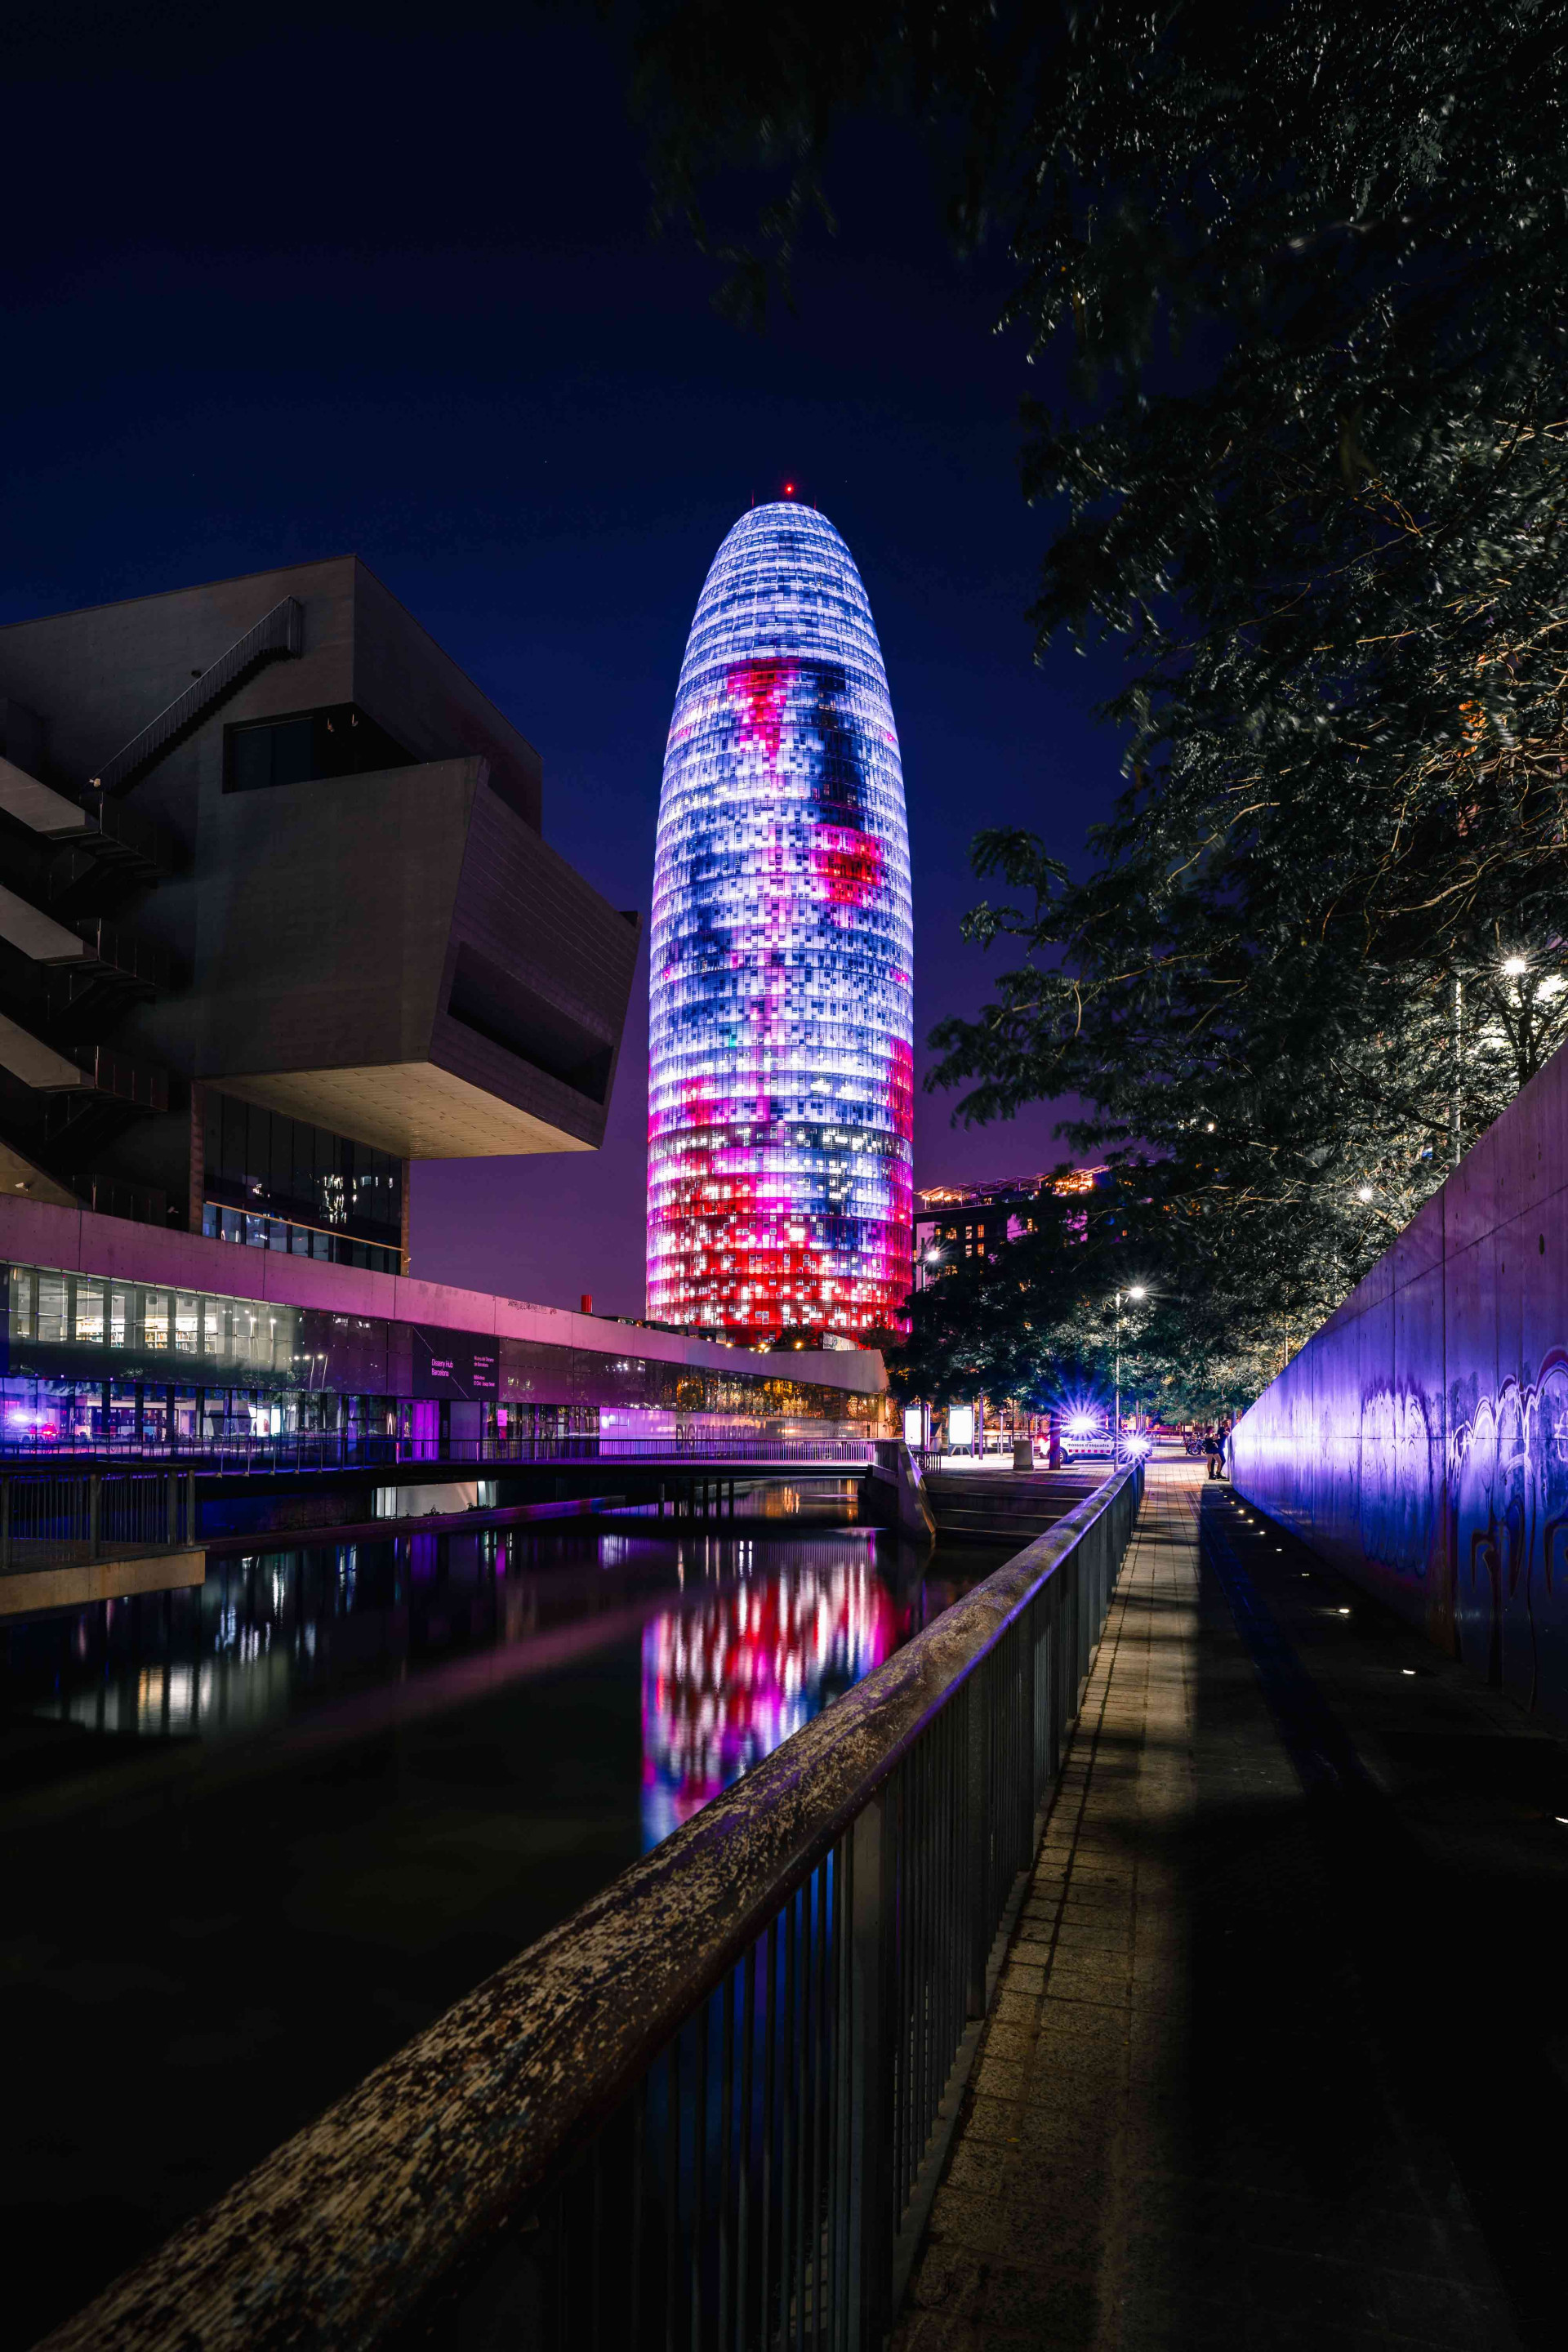 Barcelona’s Innovation and Technology District